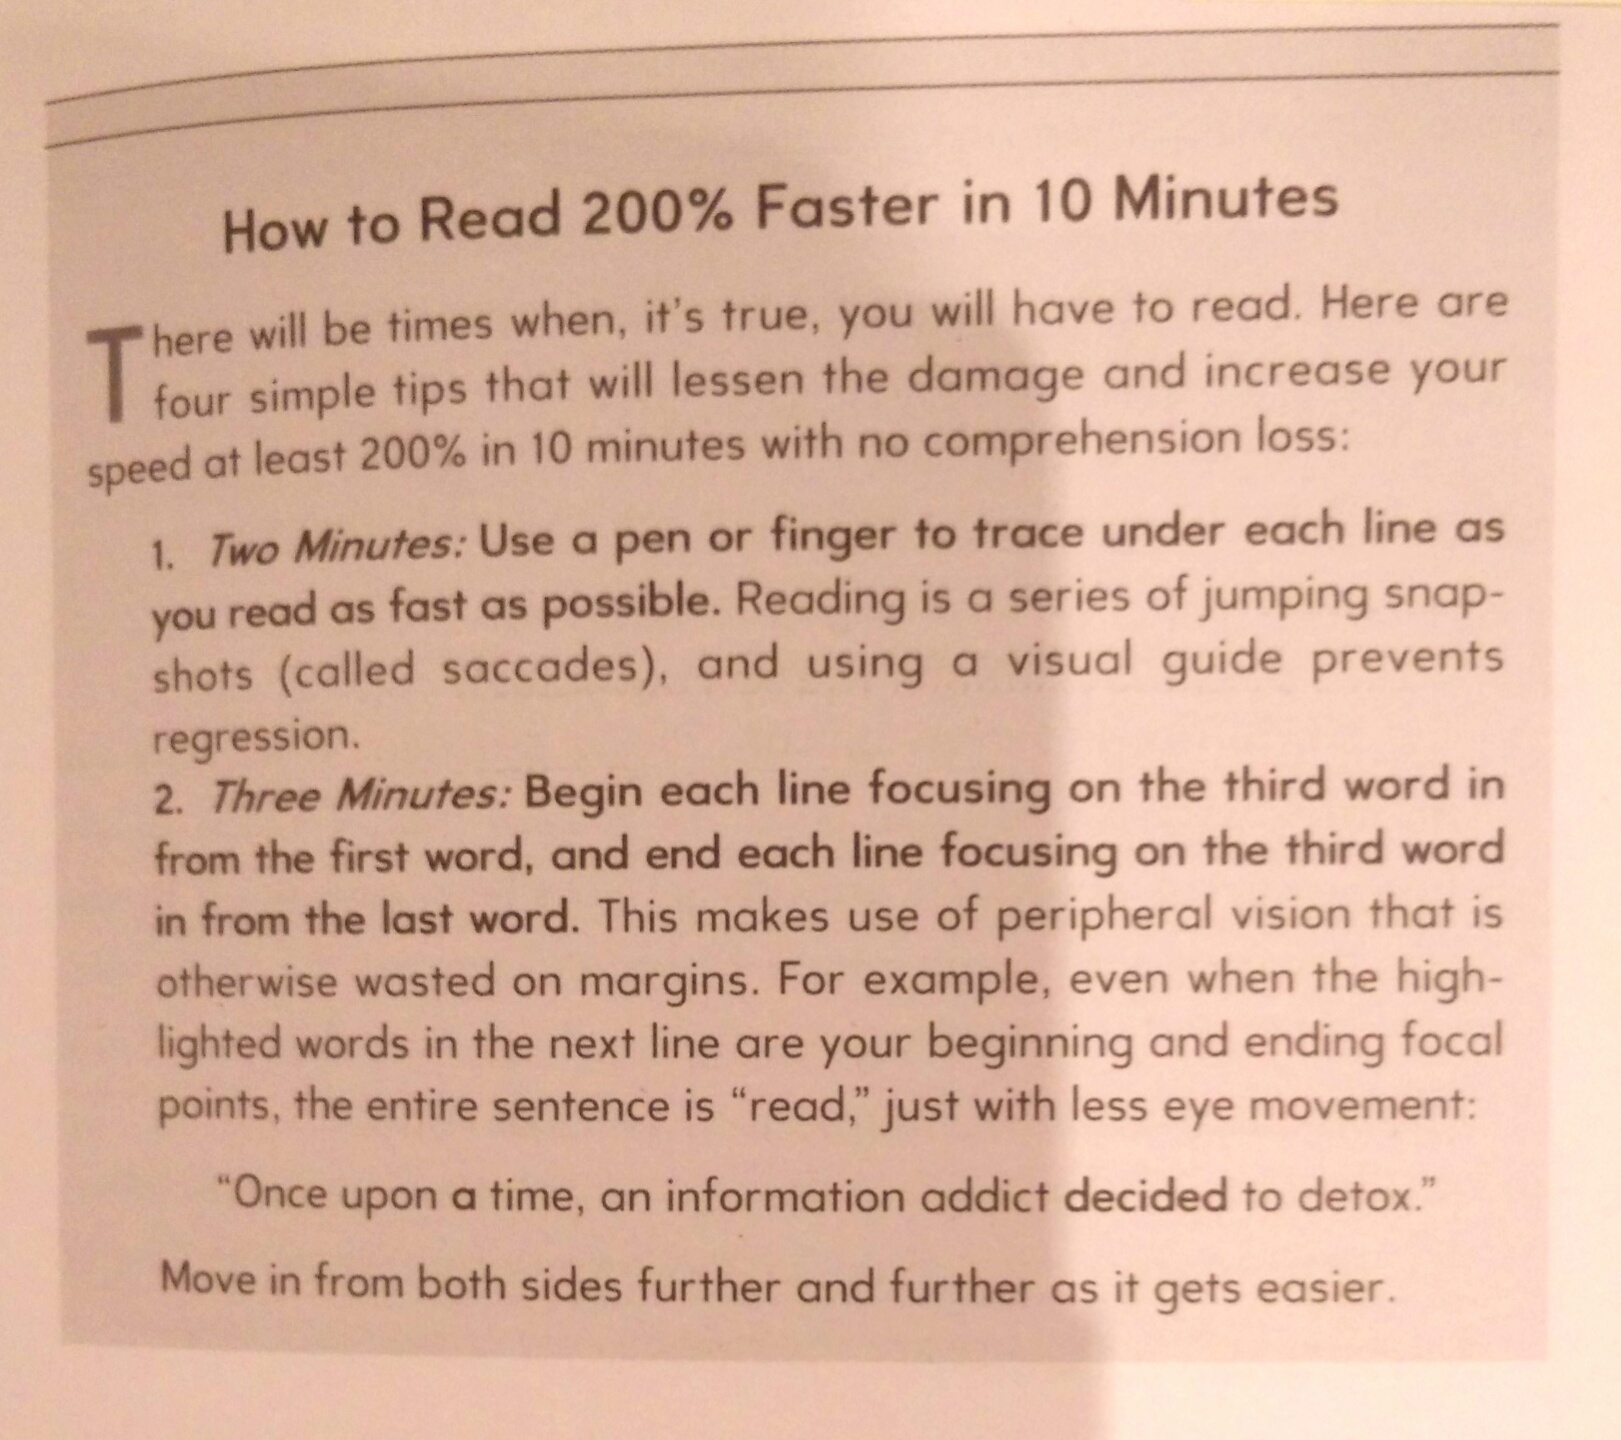 How to read faster first part